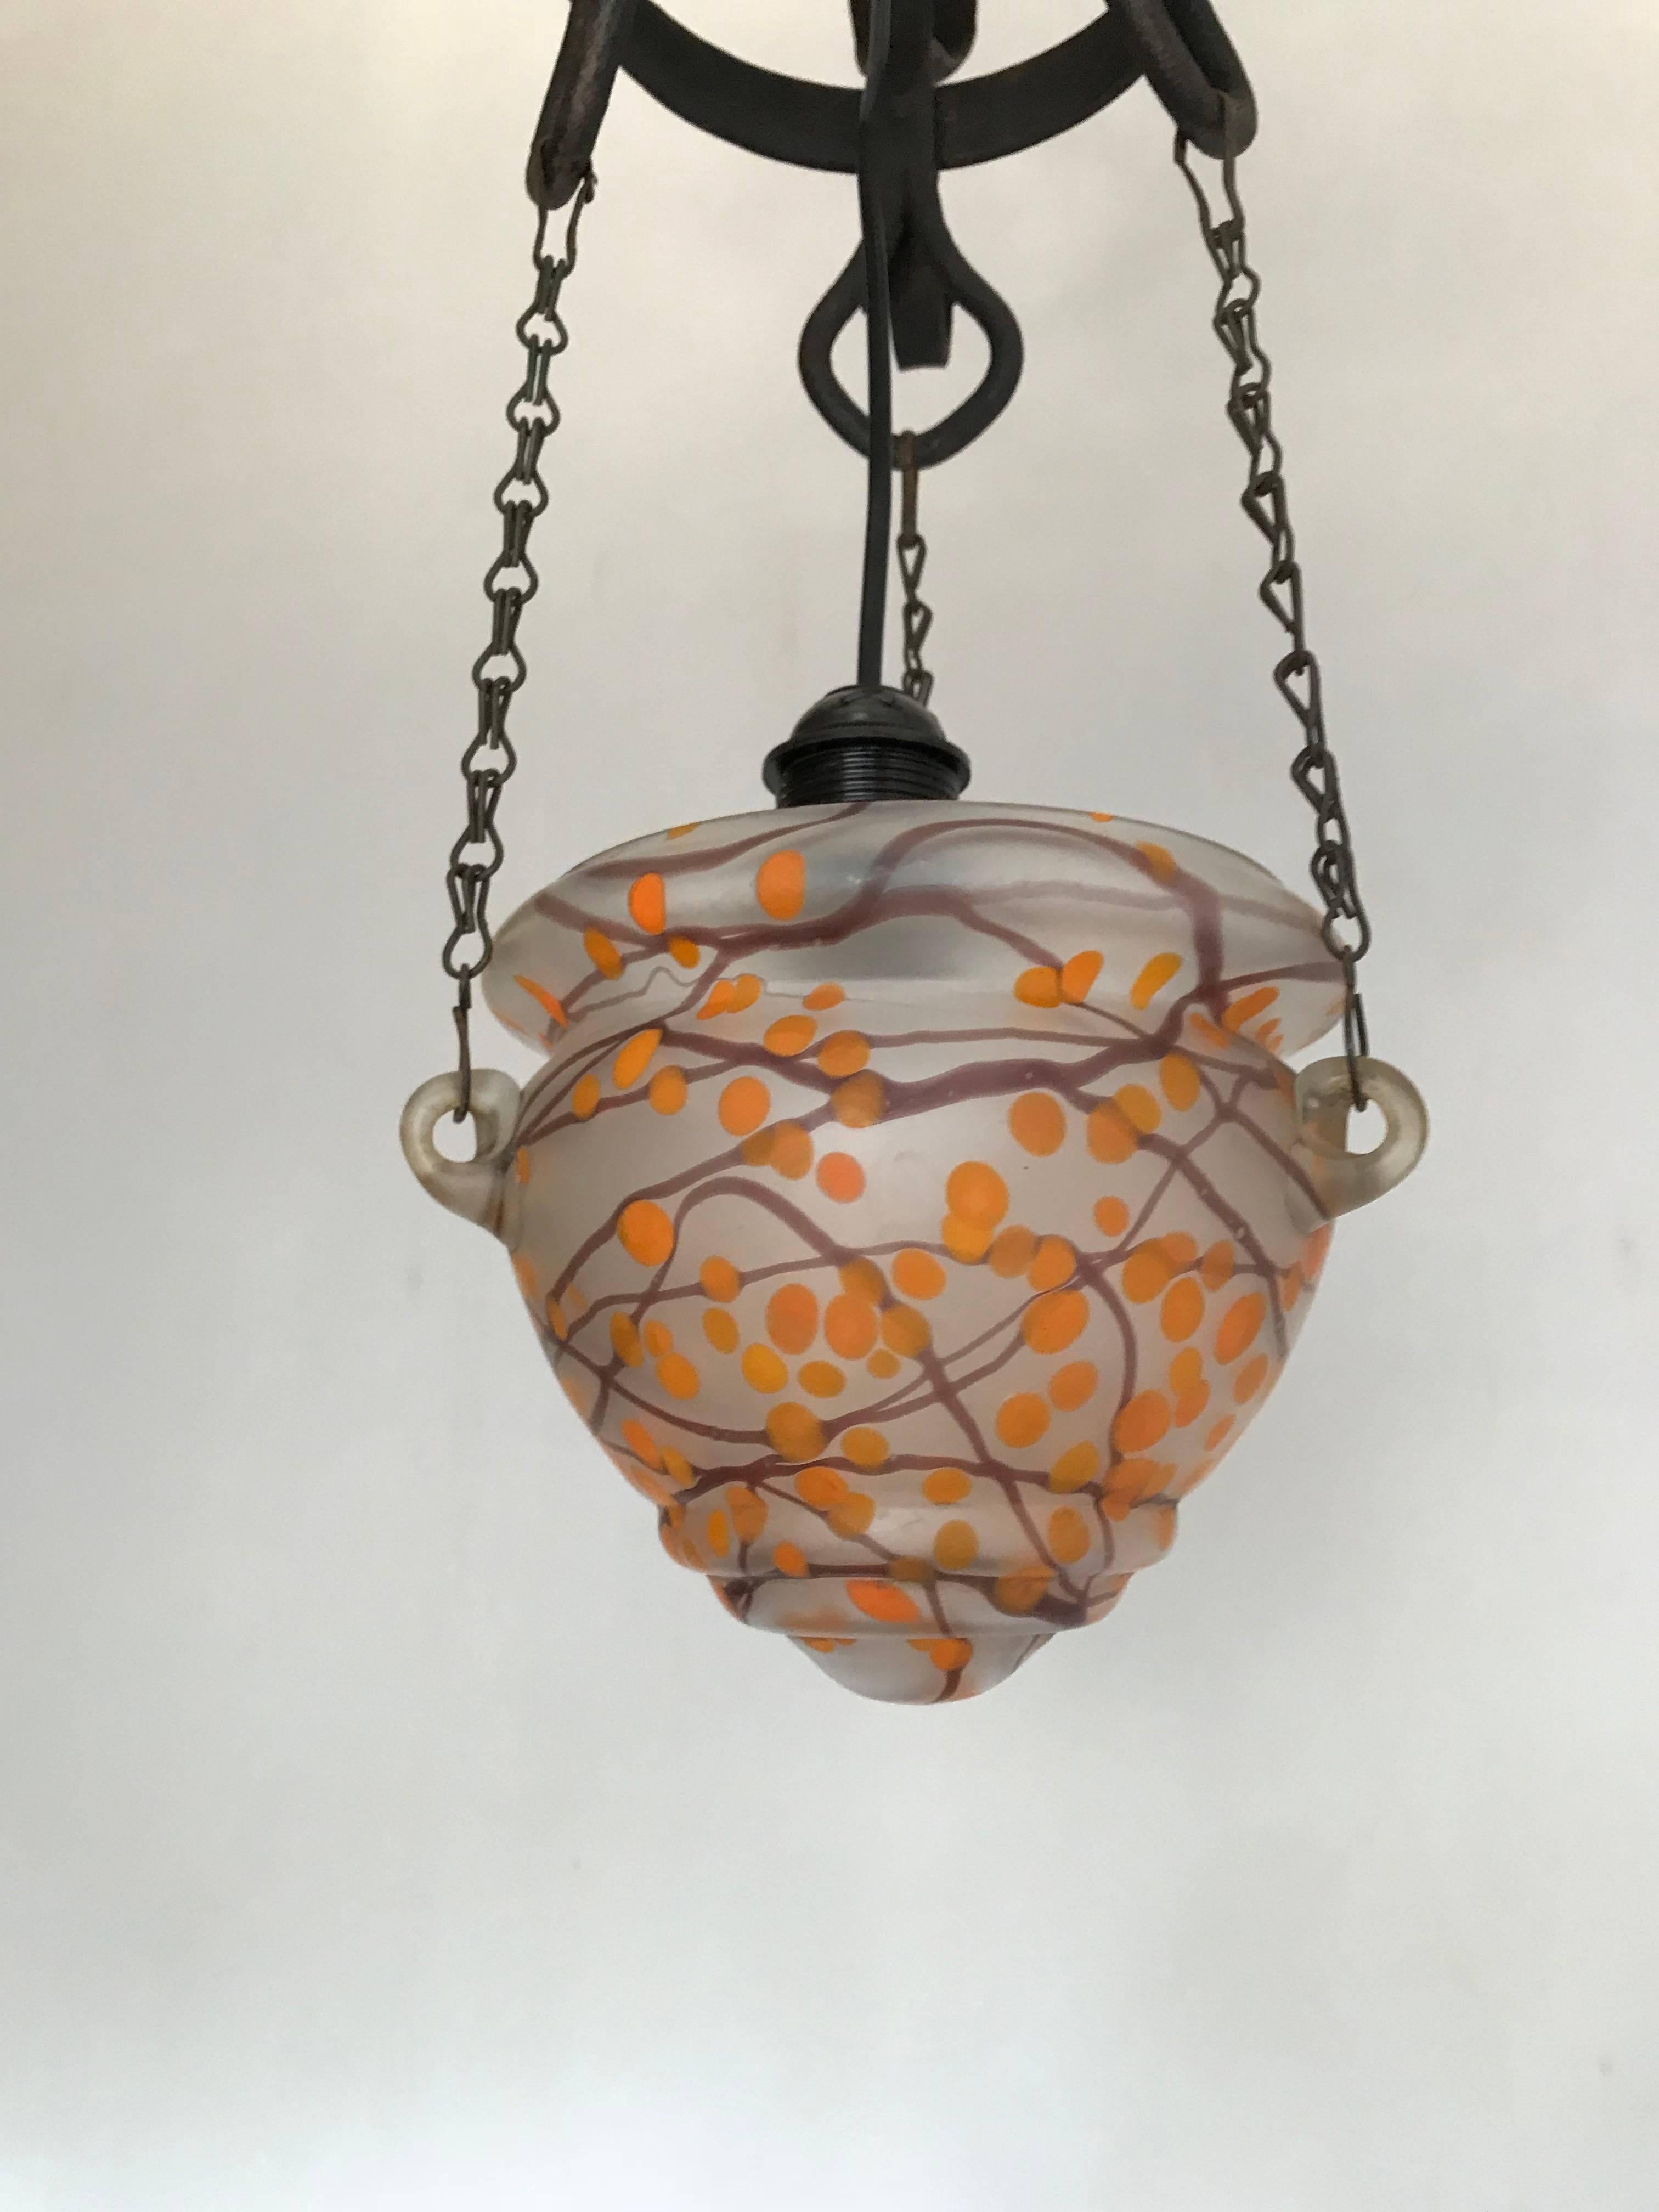 French Art Nouveau Wrought Iron Pendant Light with Mouth Blown Artistic Glass Shade